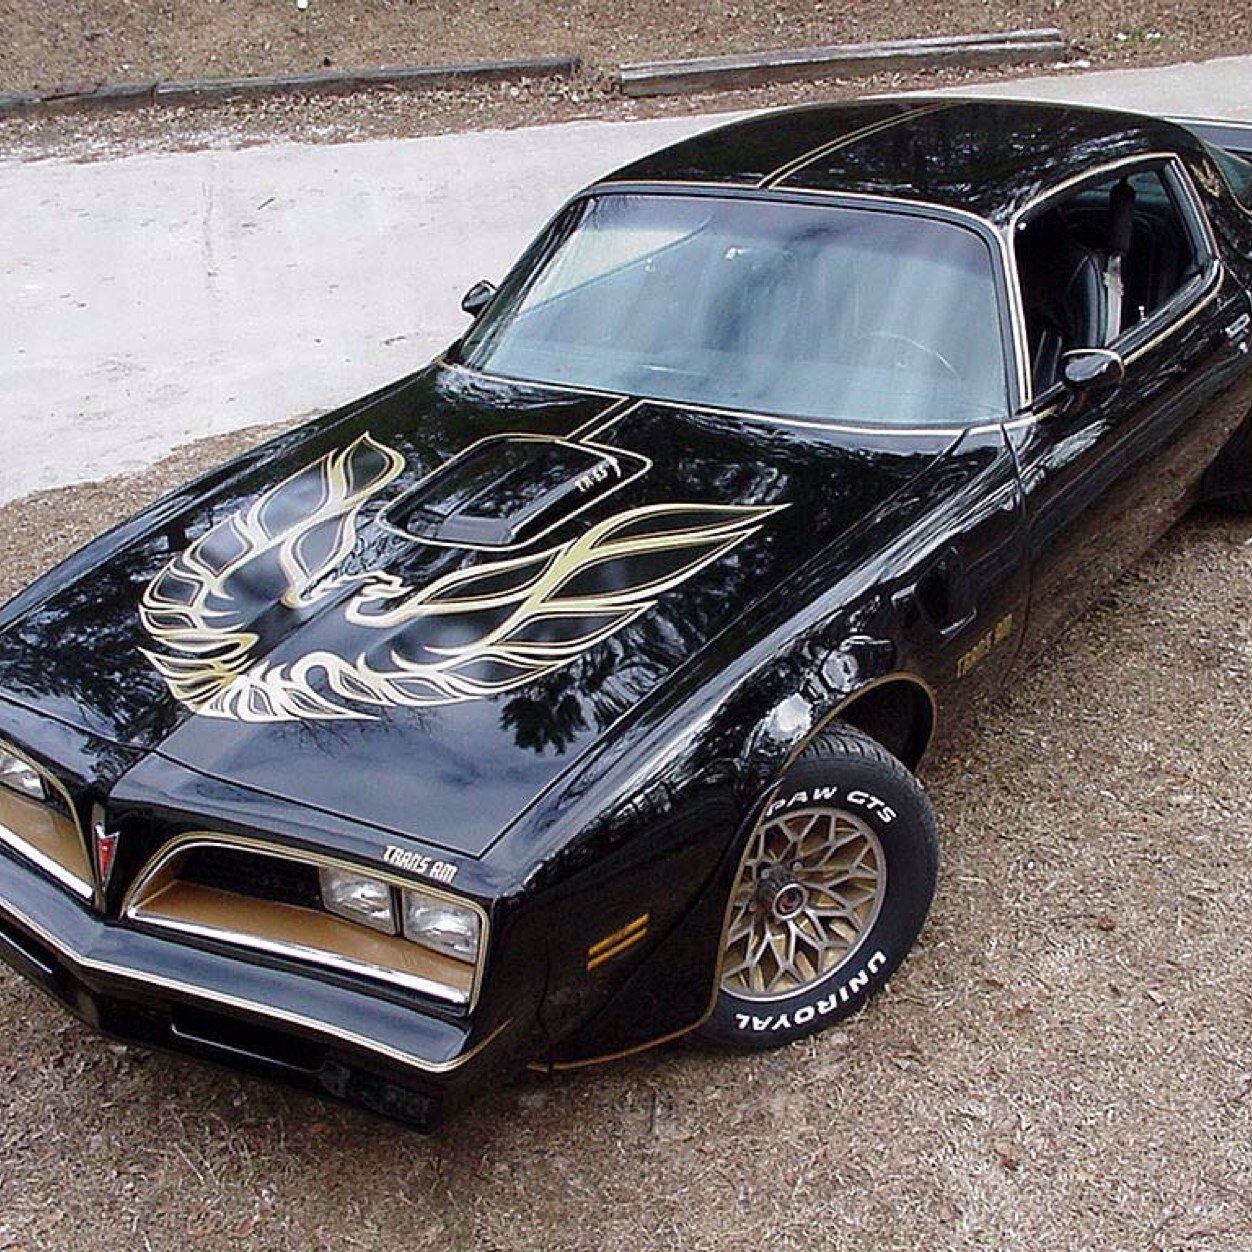 For the true fans who still appreciate old fashion muscle. #MuscleOverRicer #TeamPontiac #TransAm #AmericanMade